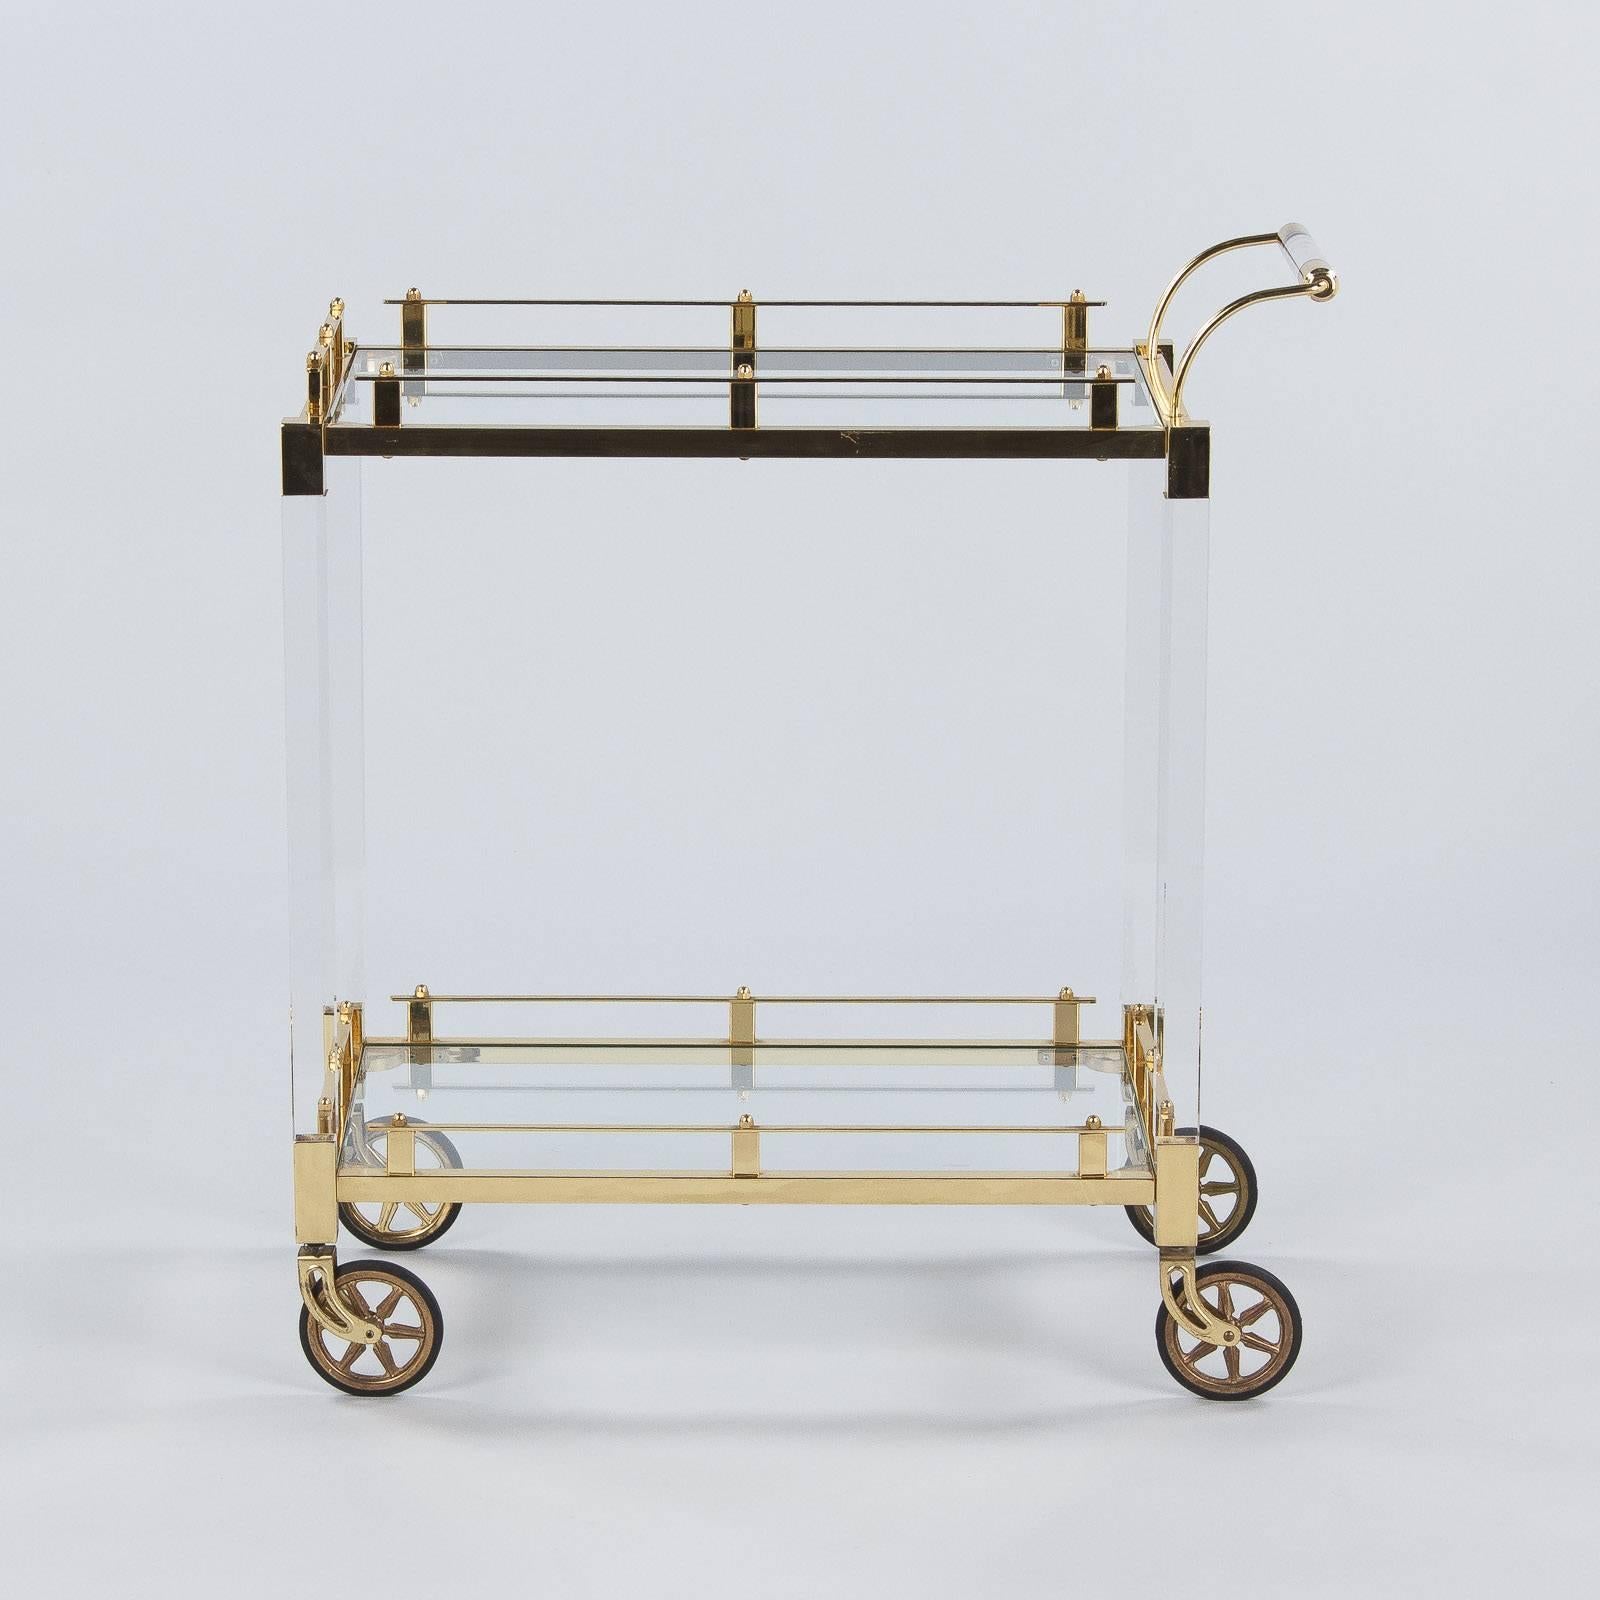 Spanish Lucite and Brass Bar Cart, Spain, 1970s